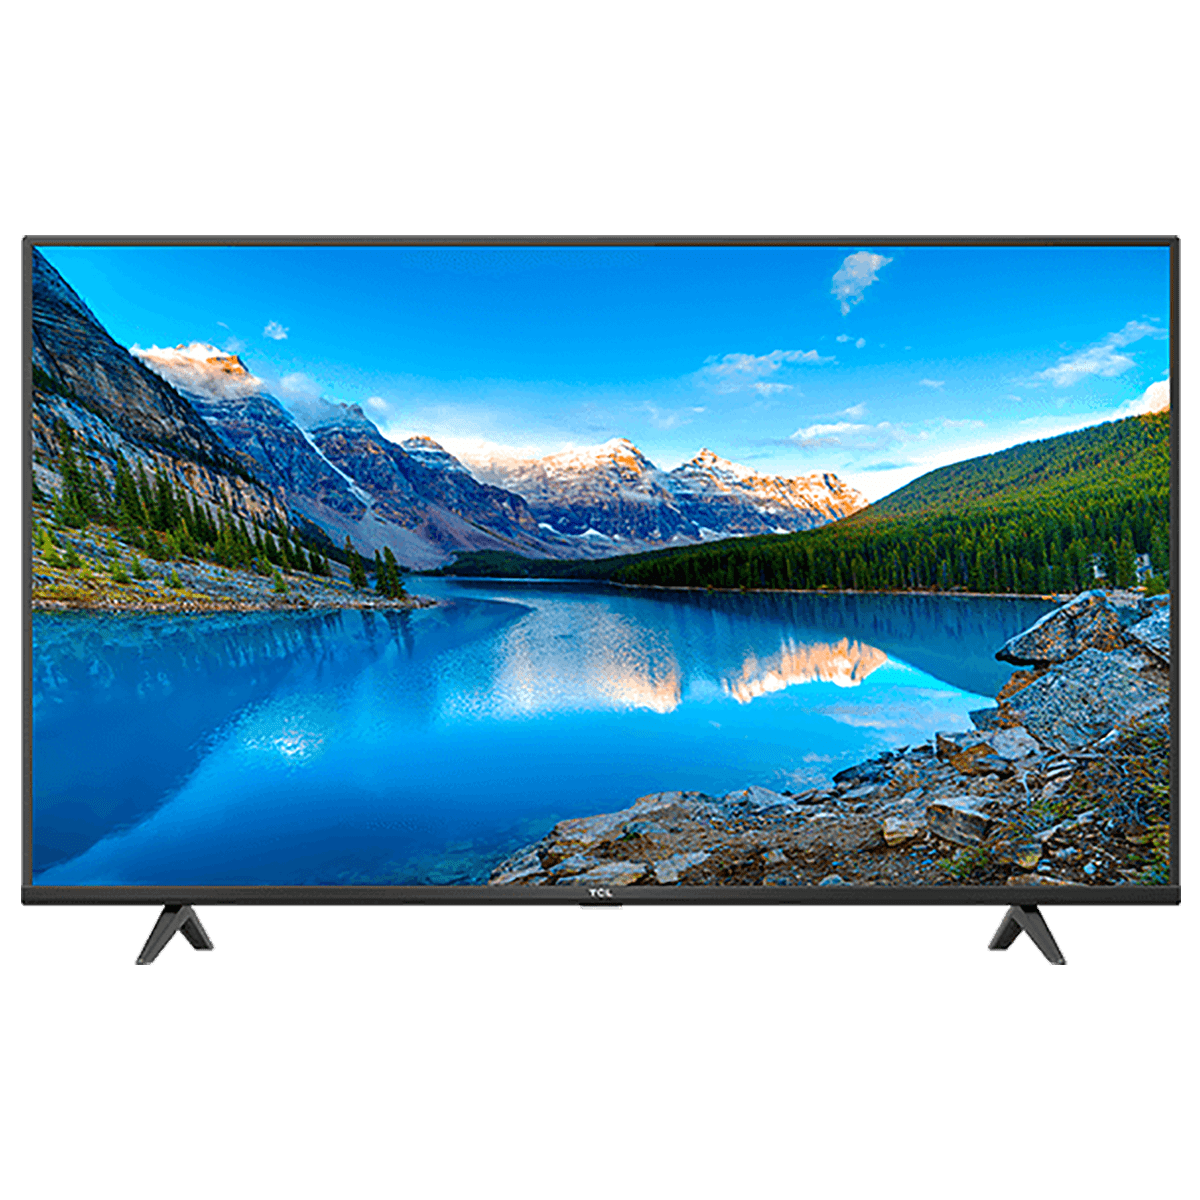 TCL P615 108cm (43 Inch) 4K Ultra HD LED Android Smart TV (Hands-Free Voice Control, 43P615, Black)_1